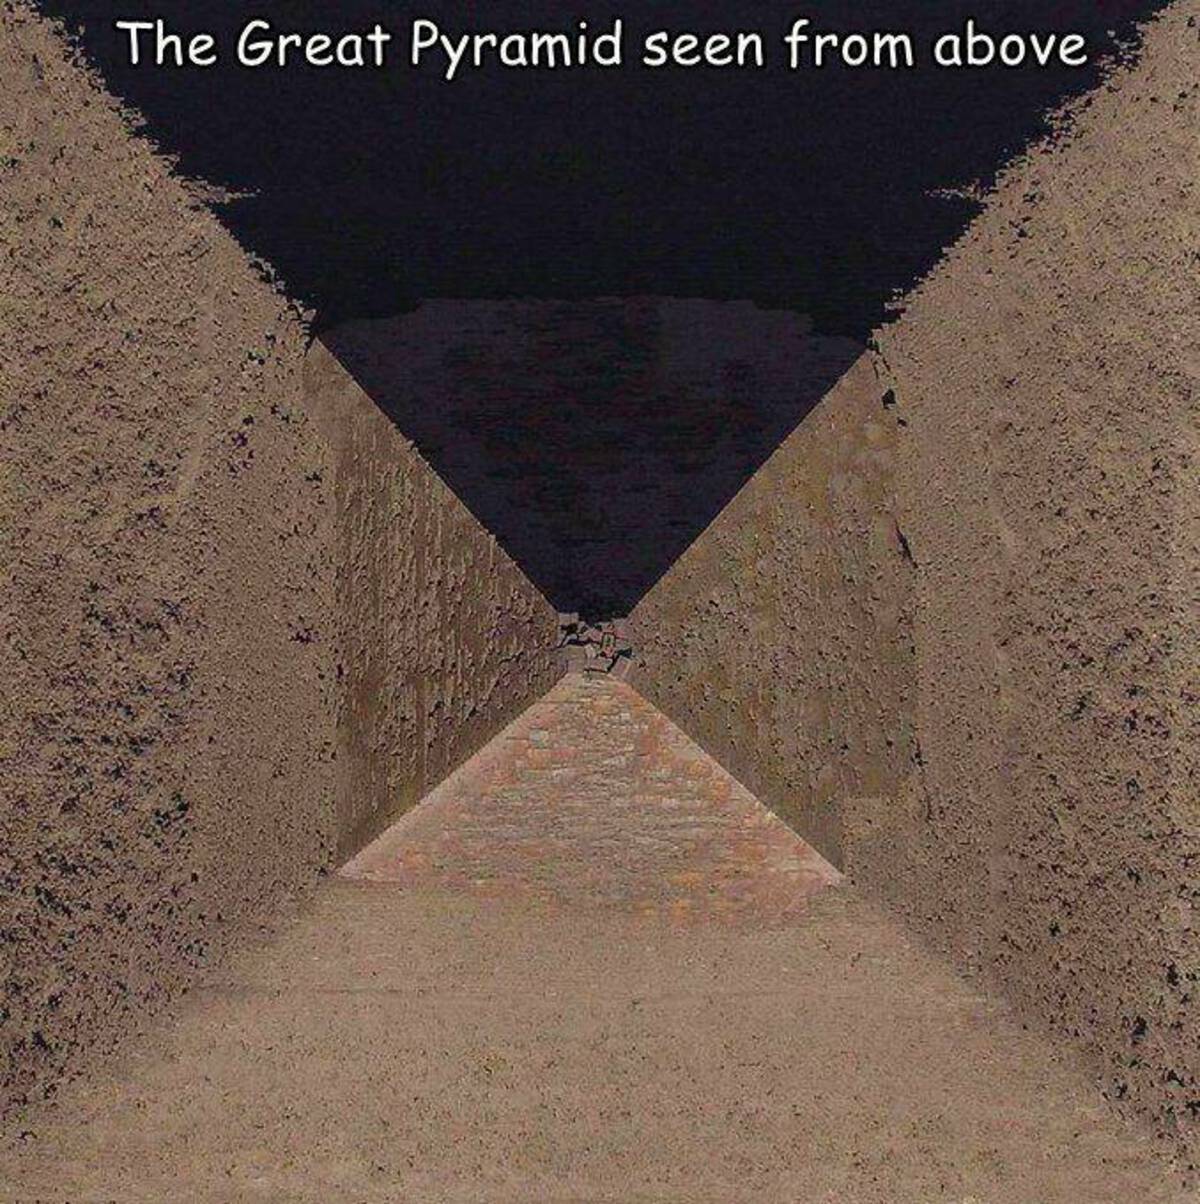 pyramid from above - The Great Pyramid seen from above